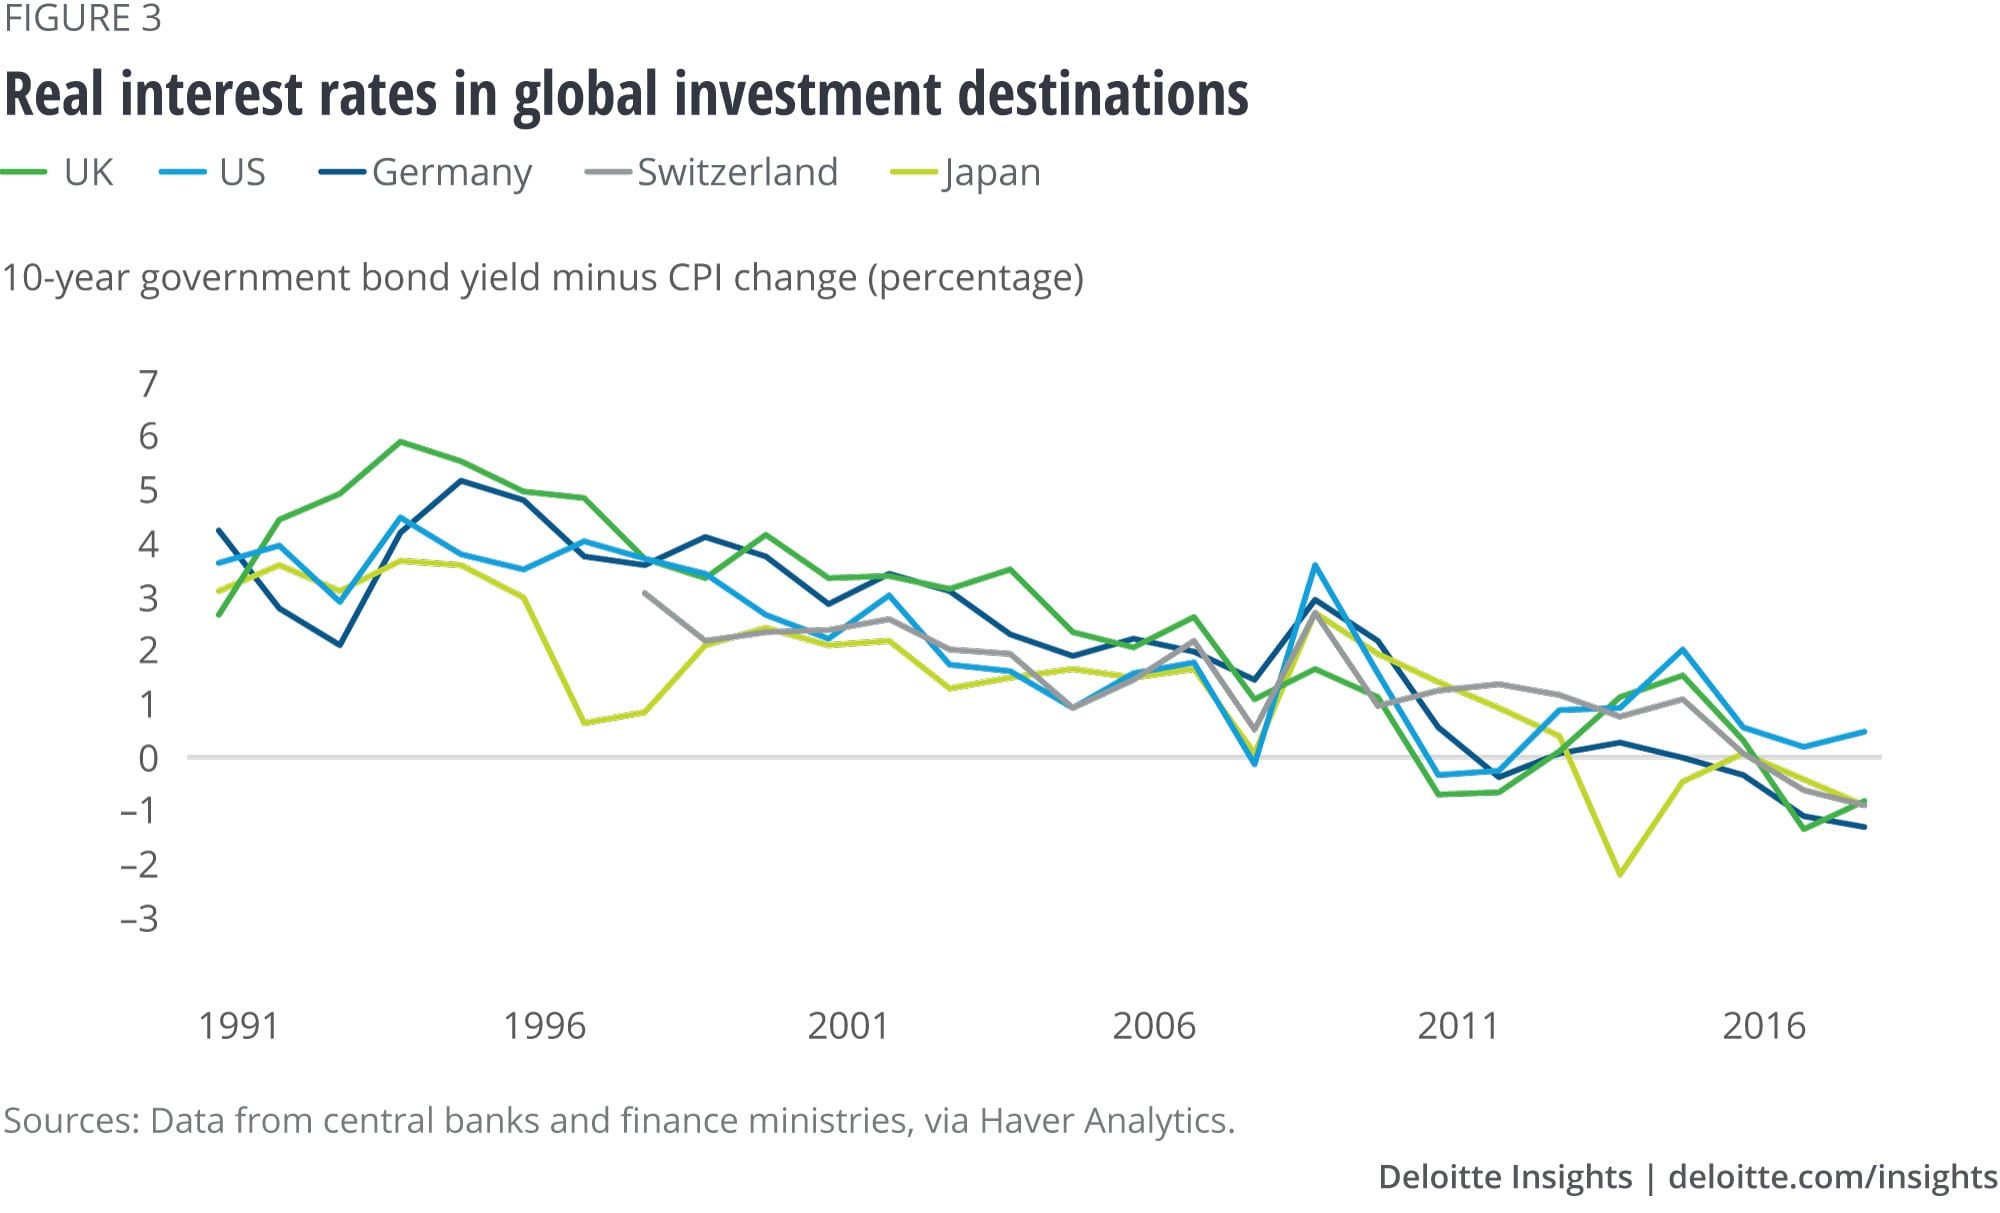 Real interest rates in global investment destinations